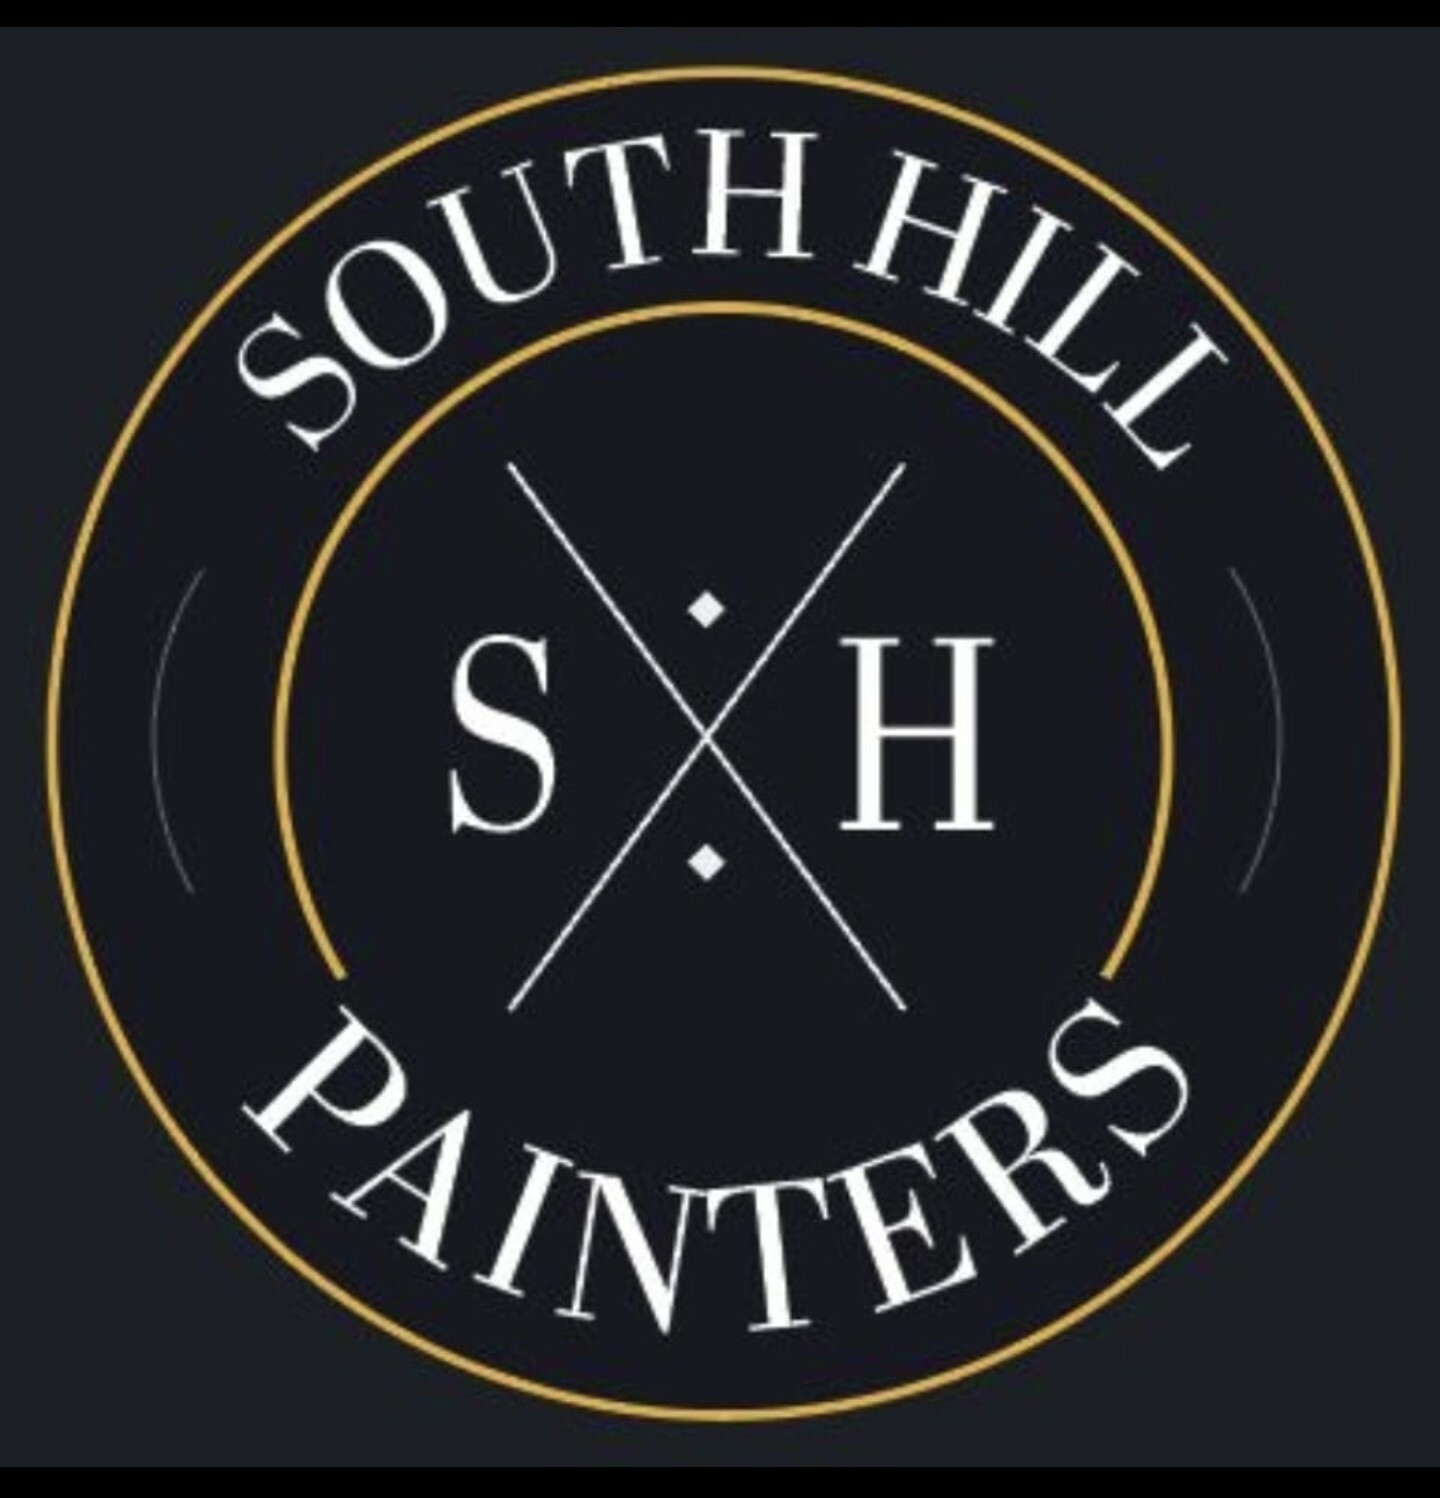 South Hill Painters's logo